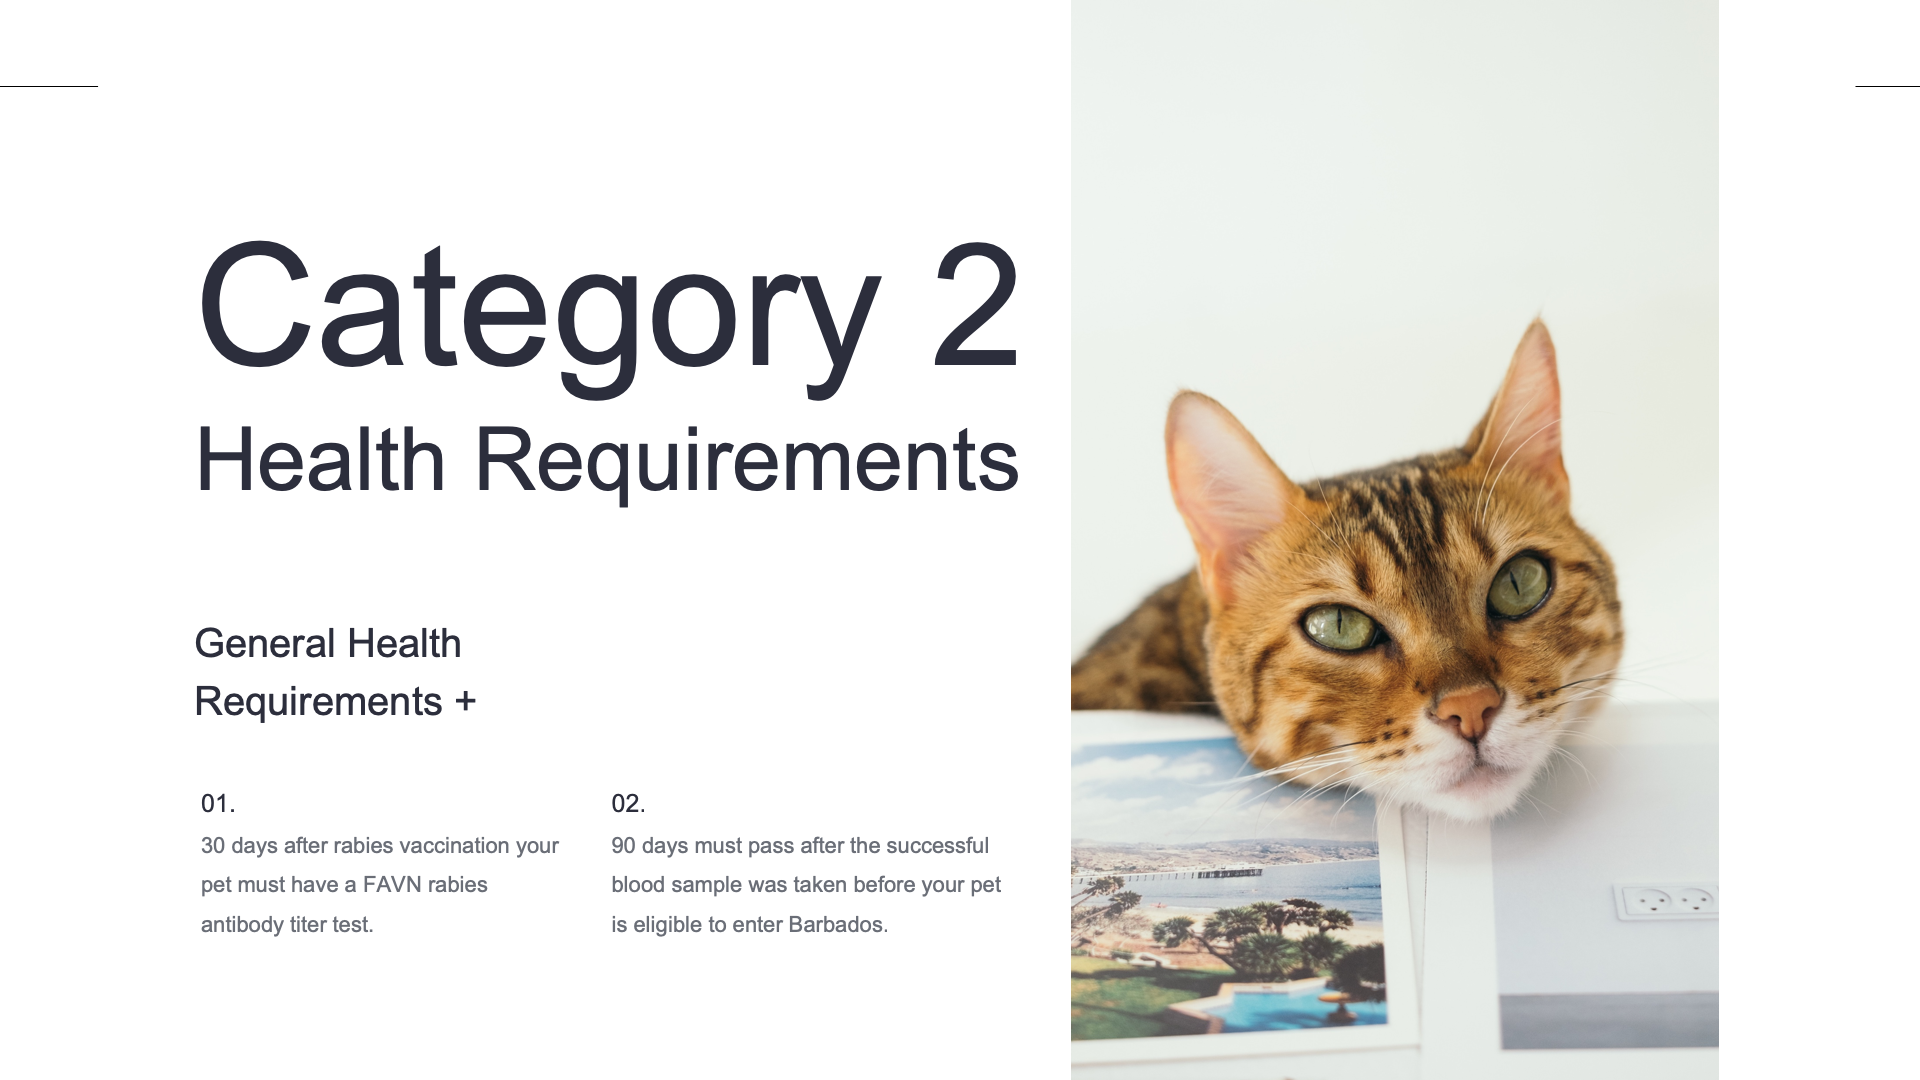 Category 2 Health Requirements